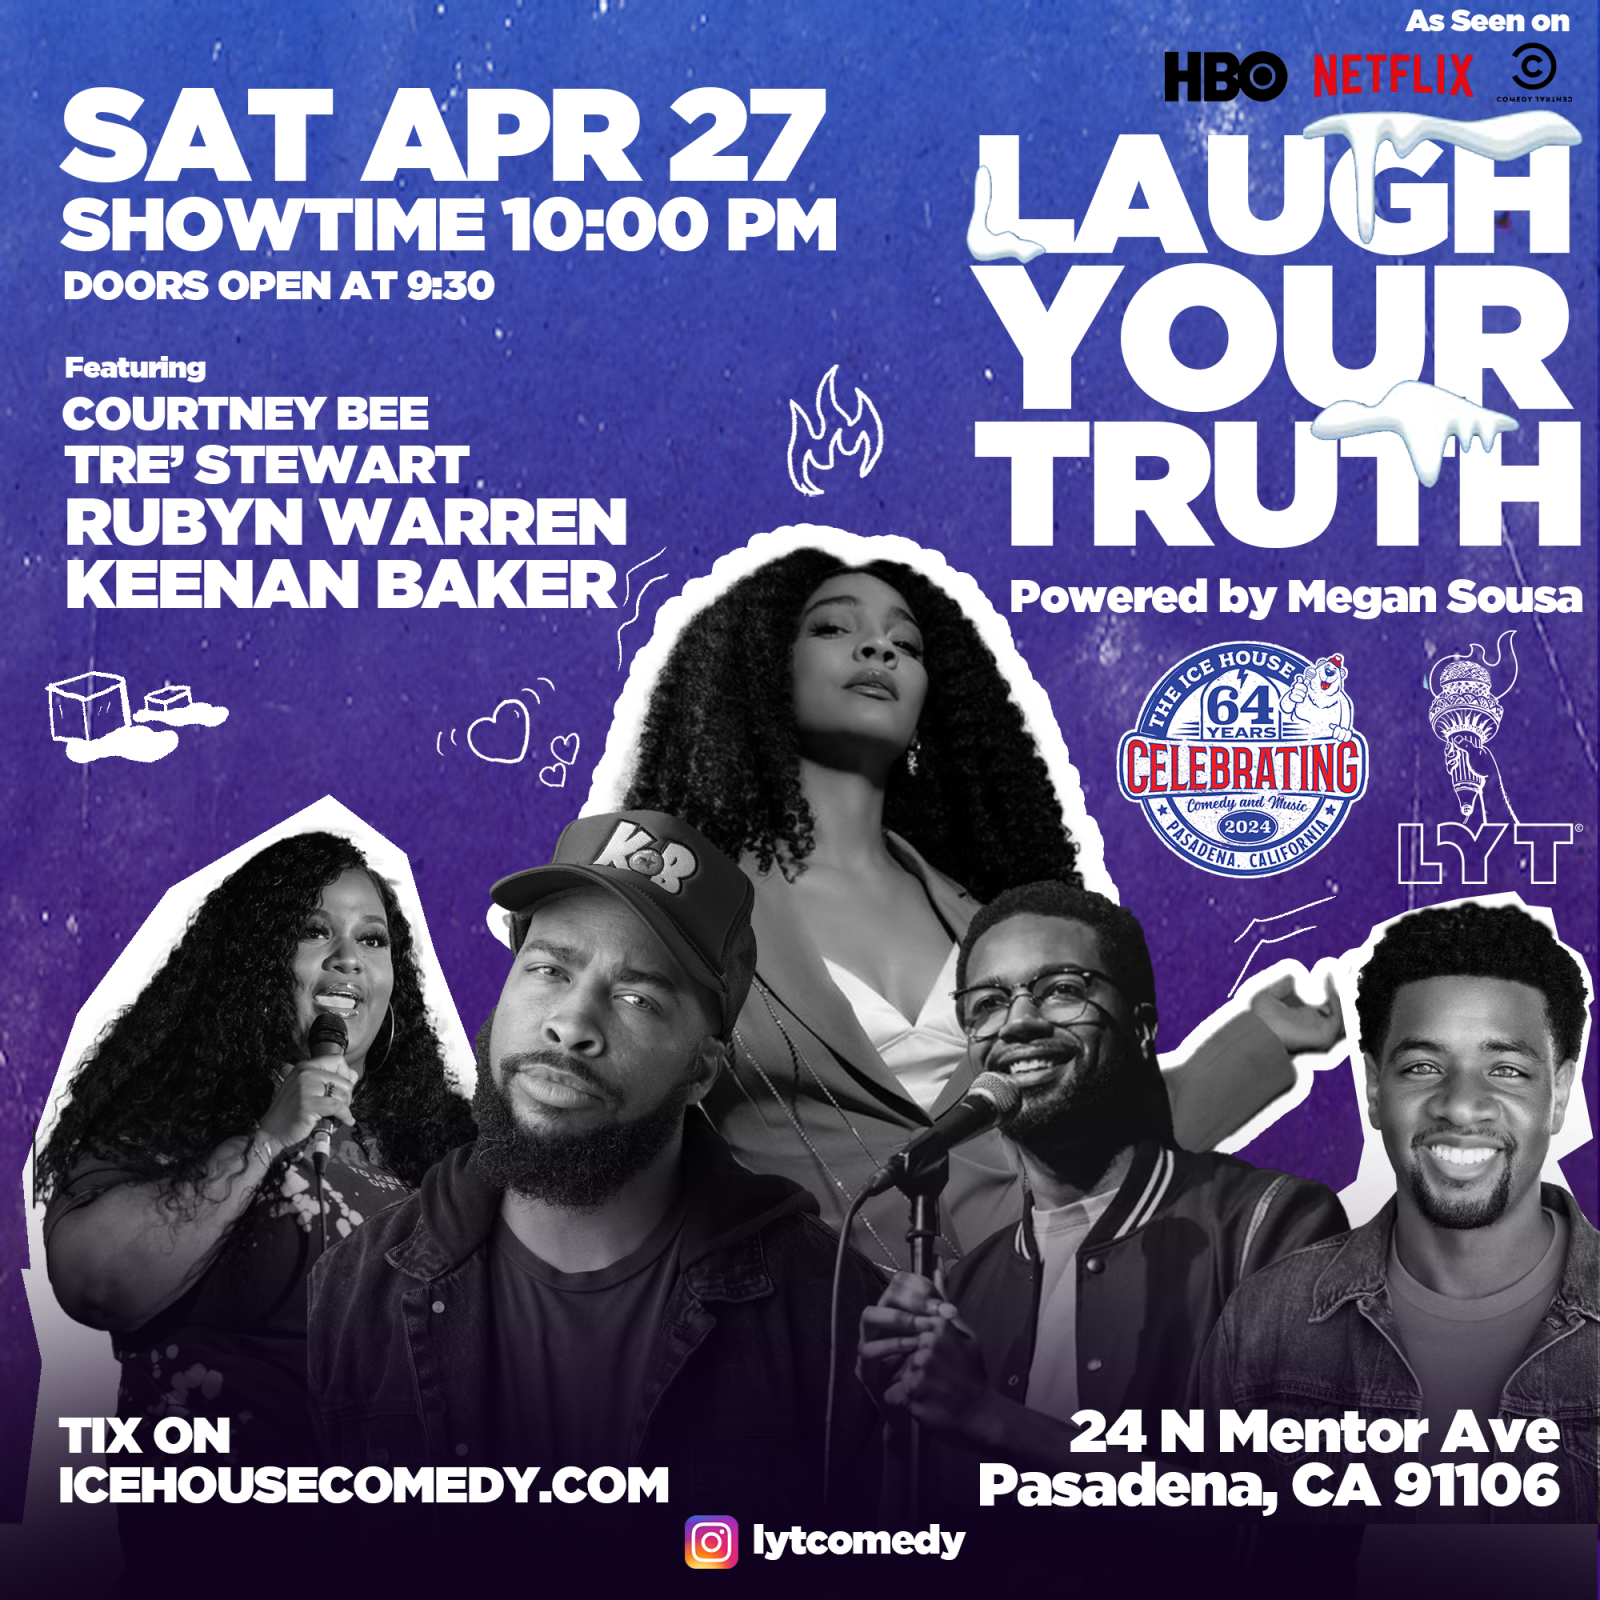 Laugh Your Truth Comedy Show